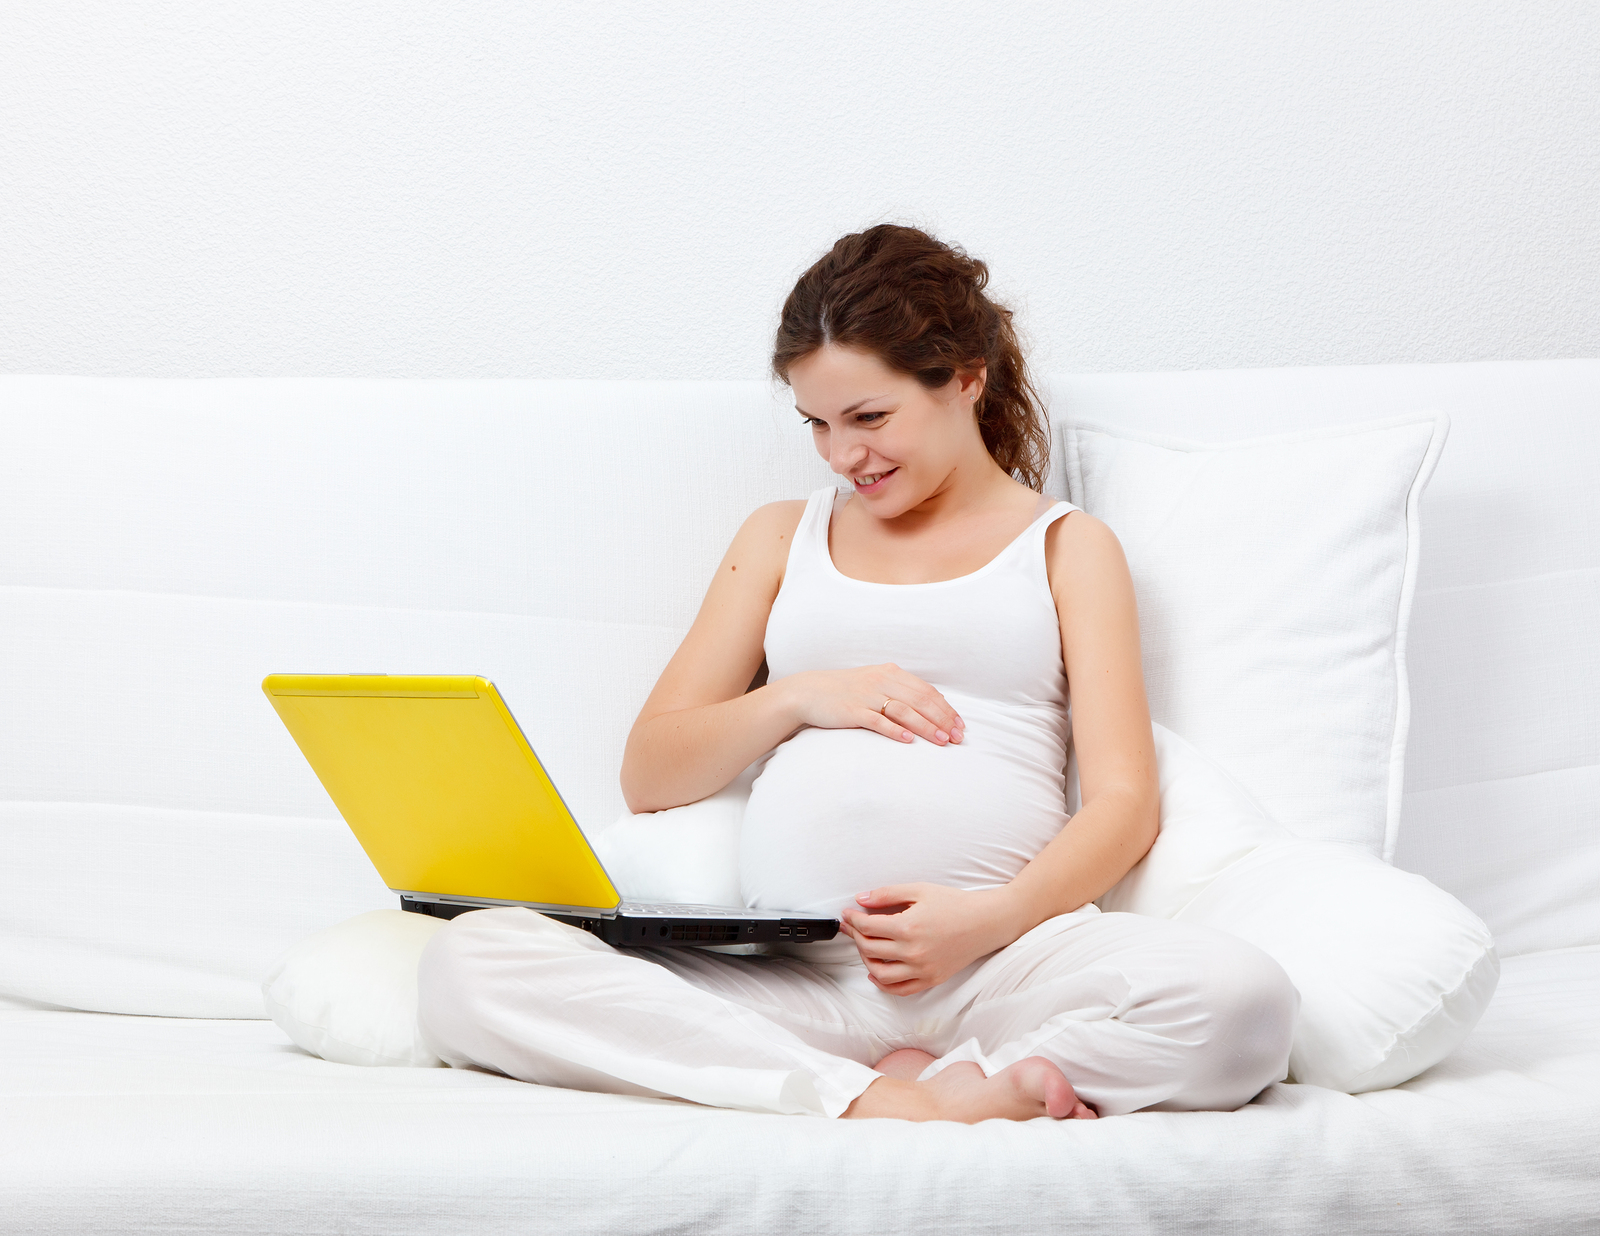 Young pregnant woman with a laptop